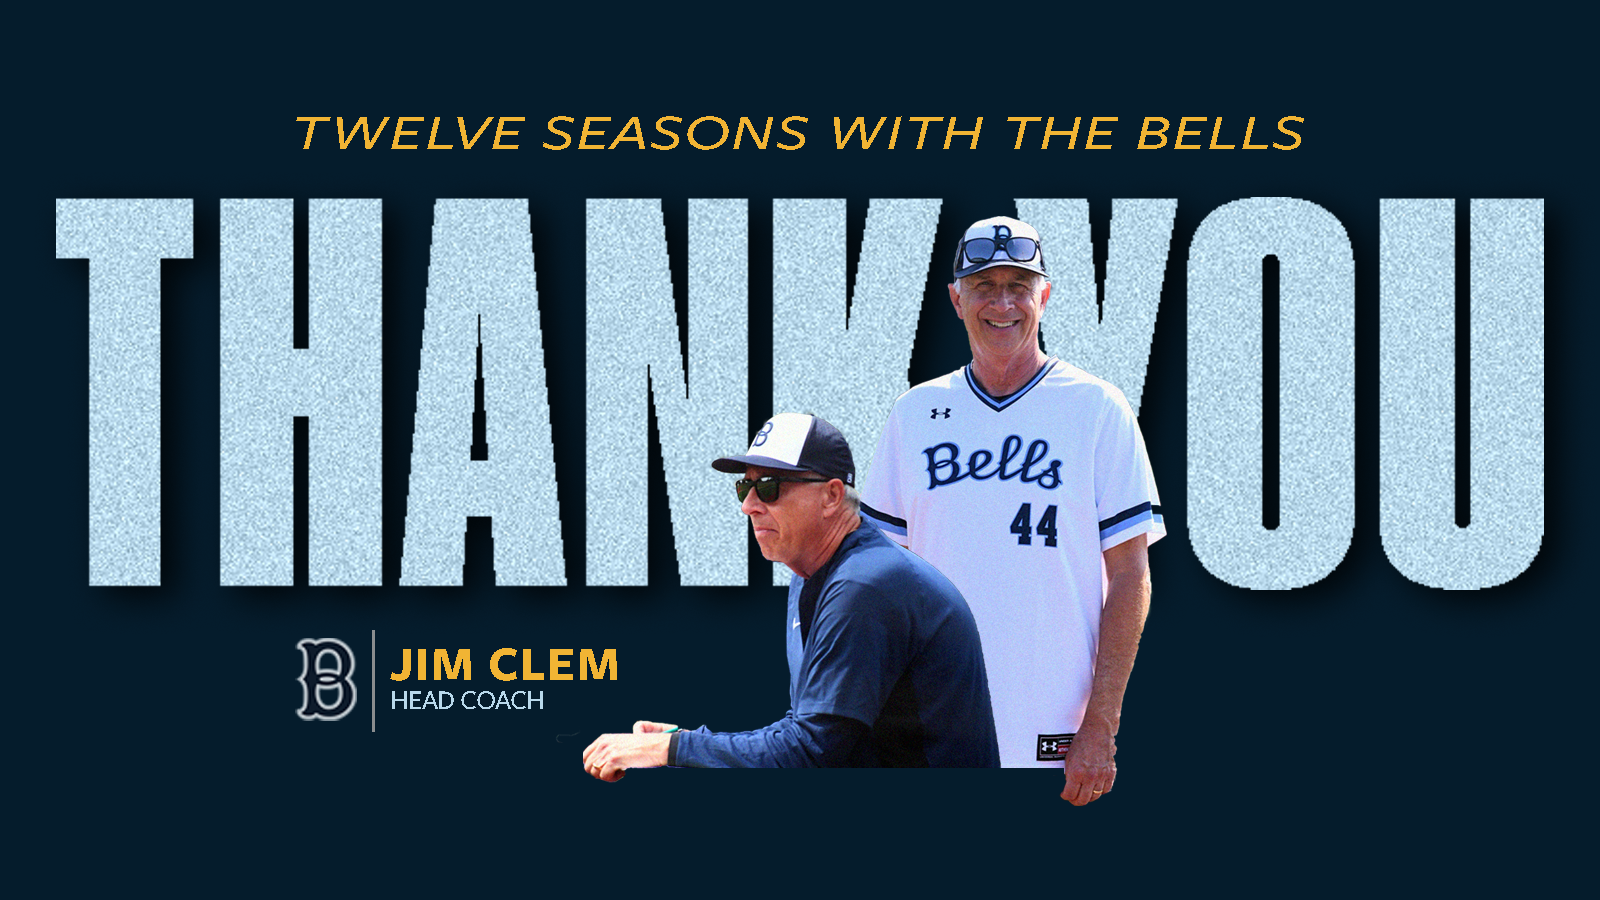 Jim Clem retires after 12 seasons with Bells